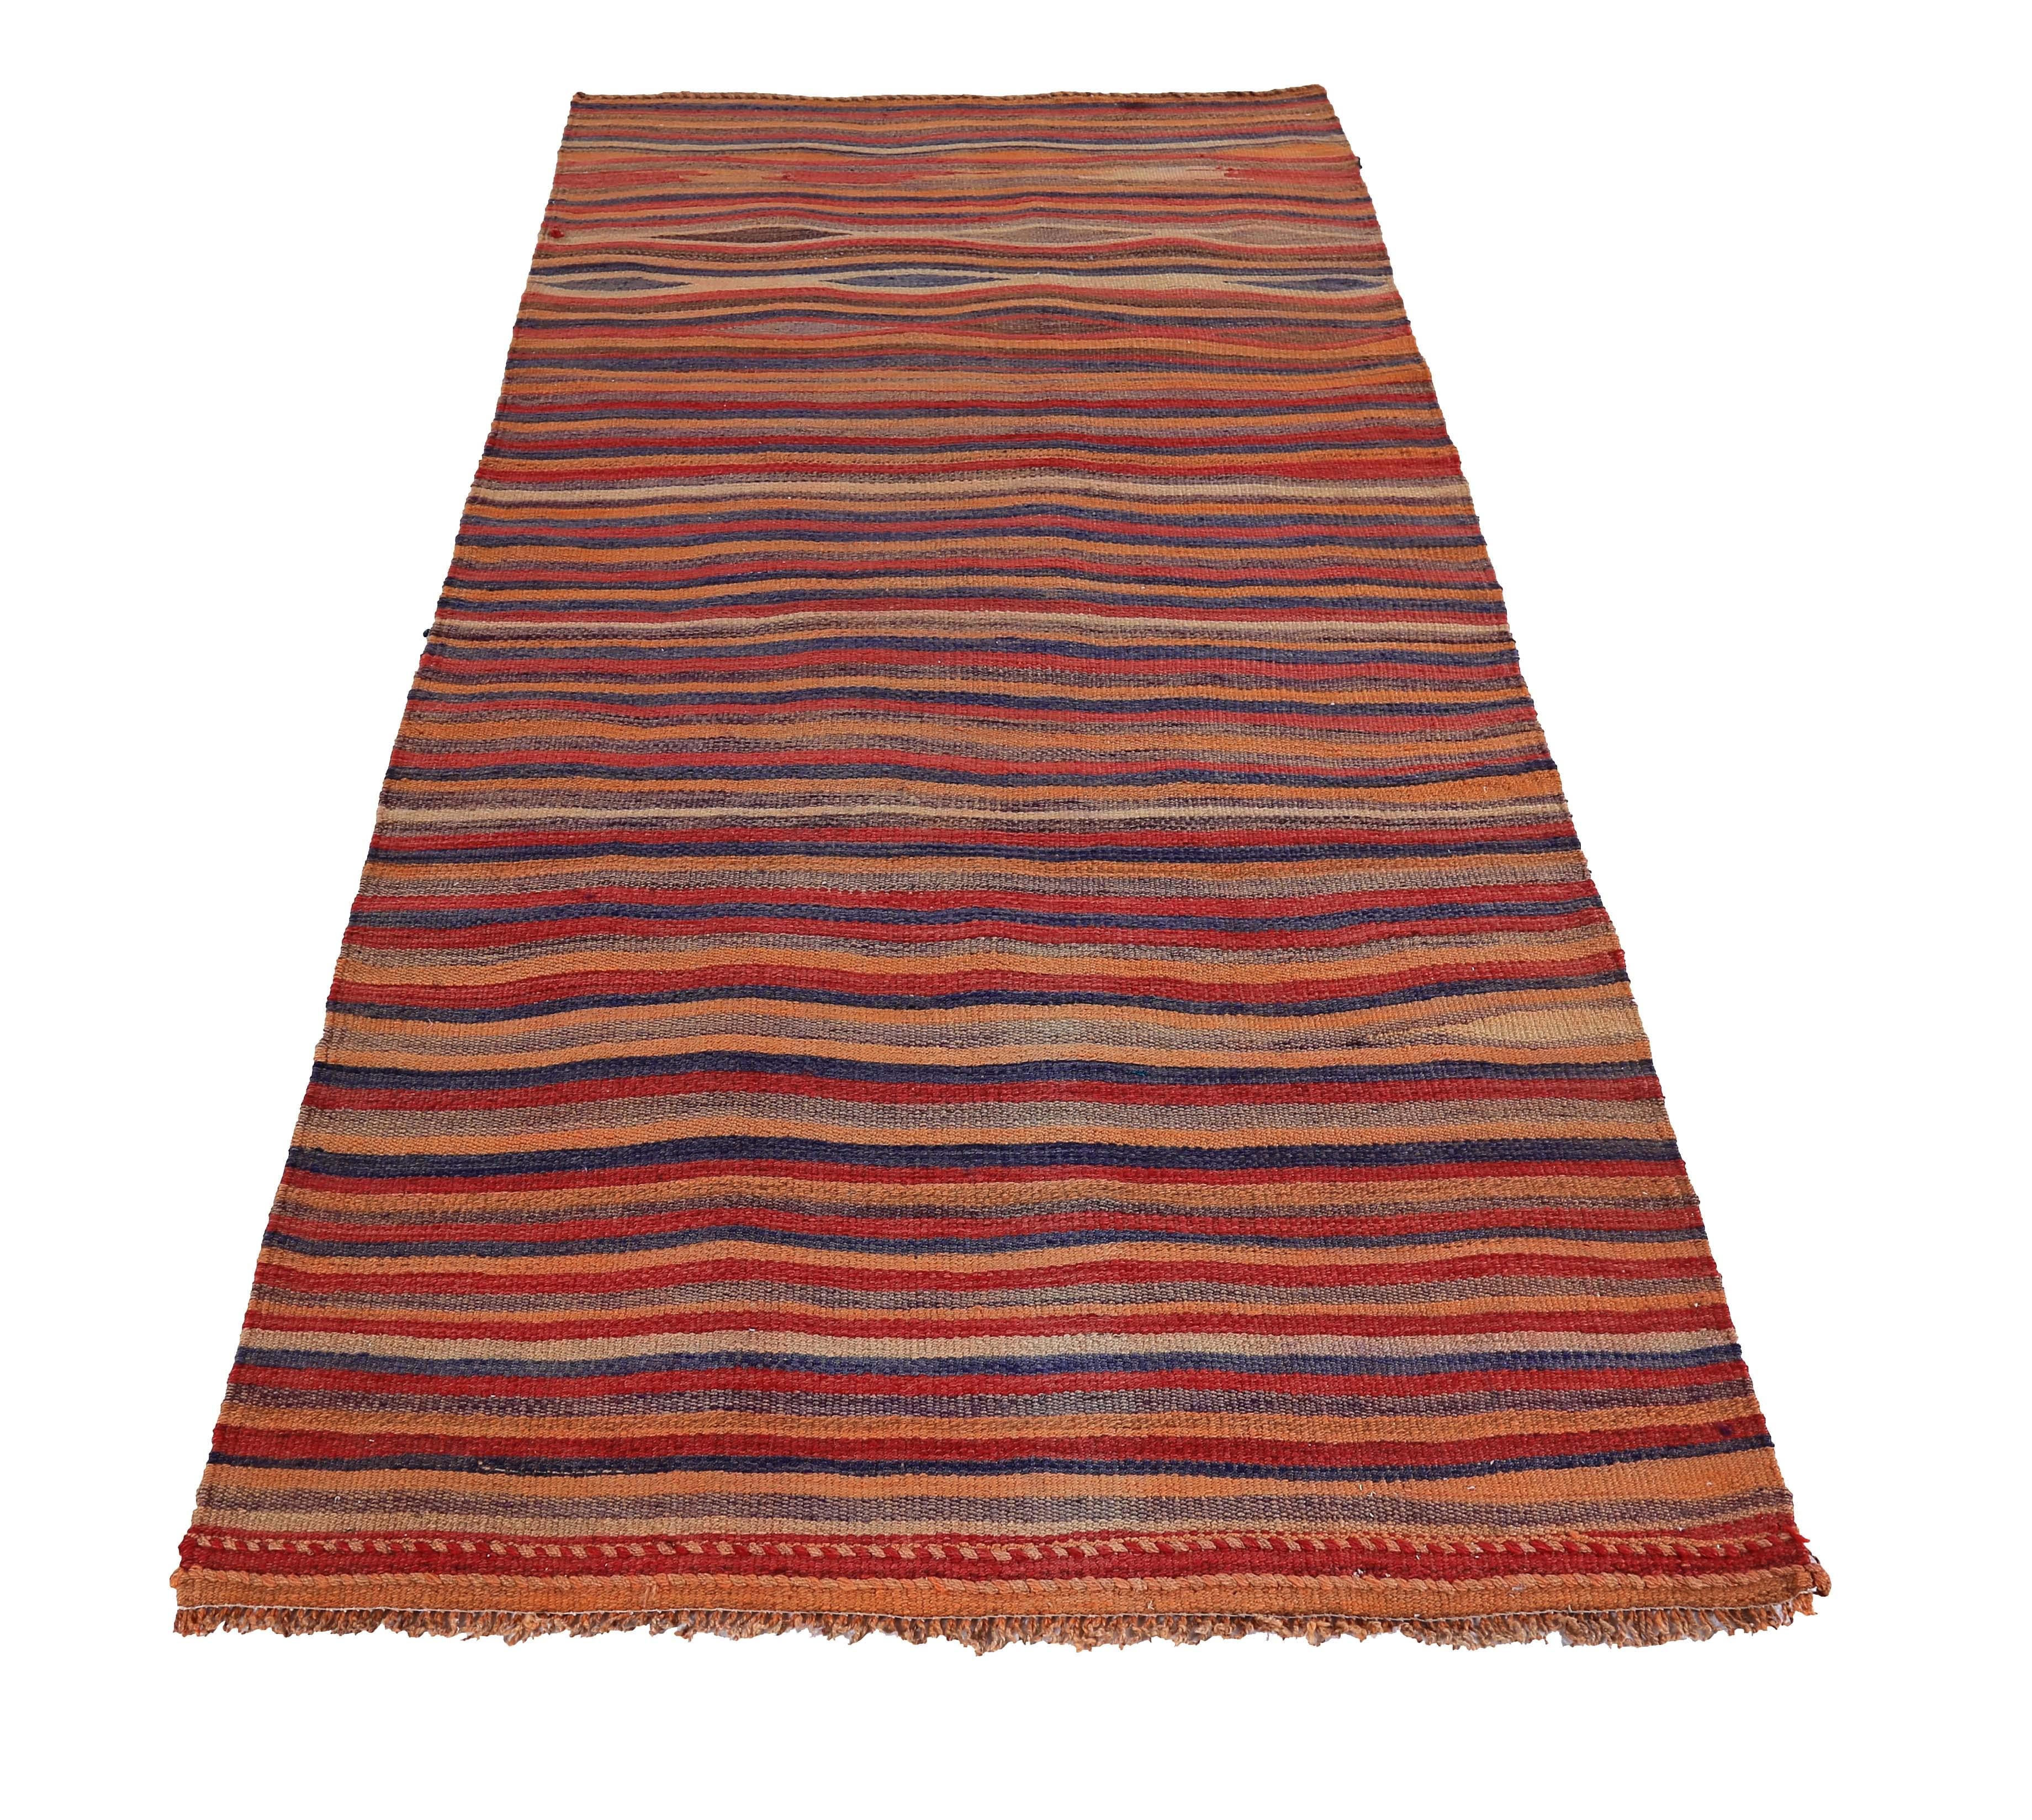 Turkish rug handwoven from the finest sheep’s wool and colored with all-natural vegetable dyes that are safe for humans and pets. It’s a traditional Kilim flat-weave design featuring red, orange and blue stripes. It’s a stunning piece to get for